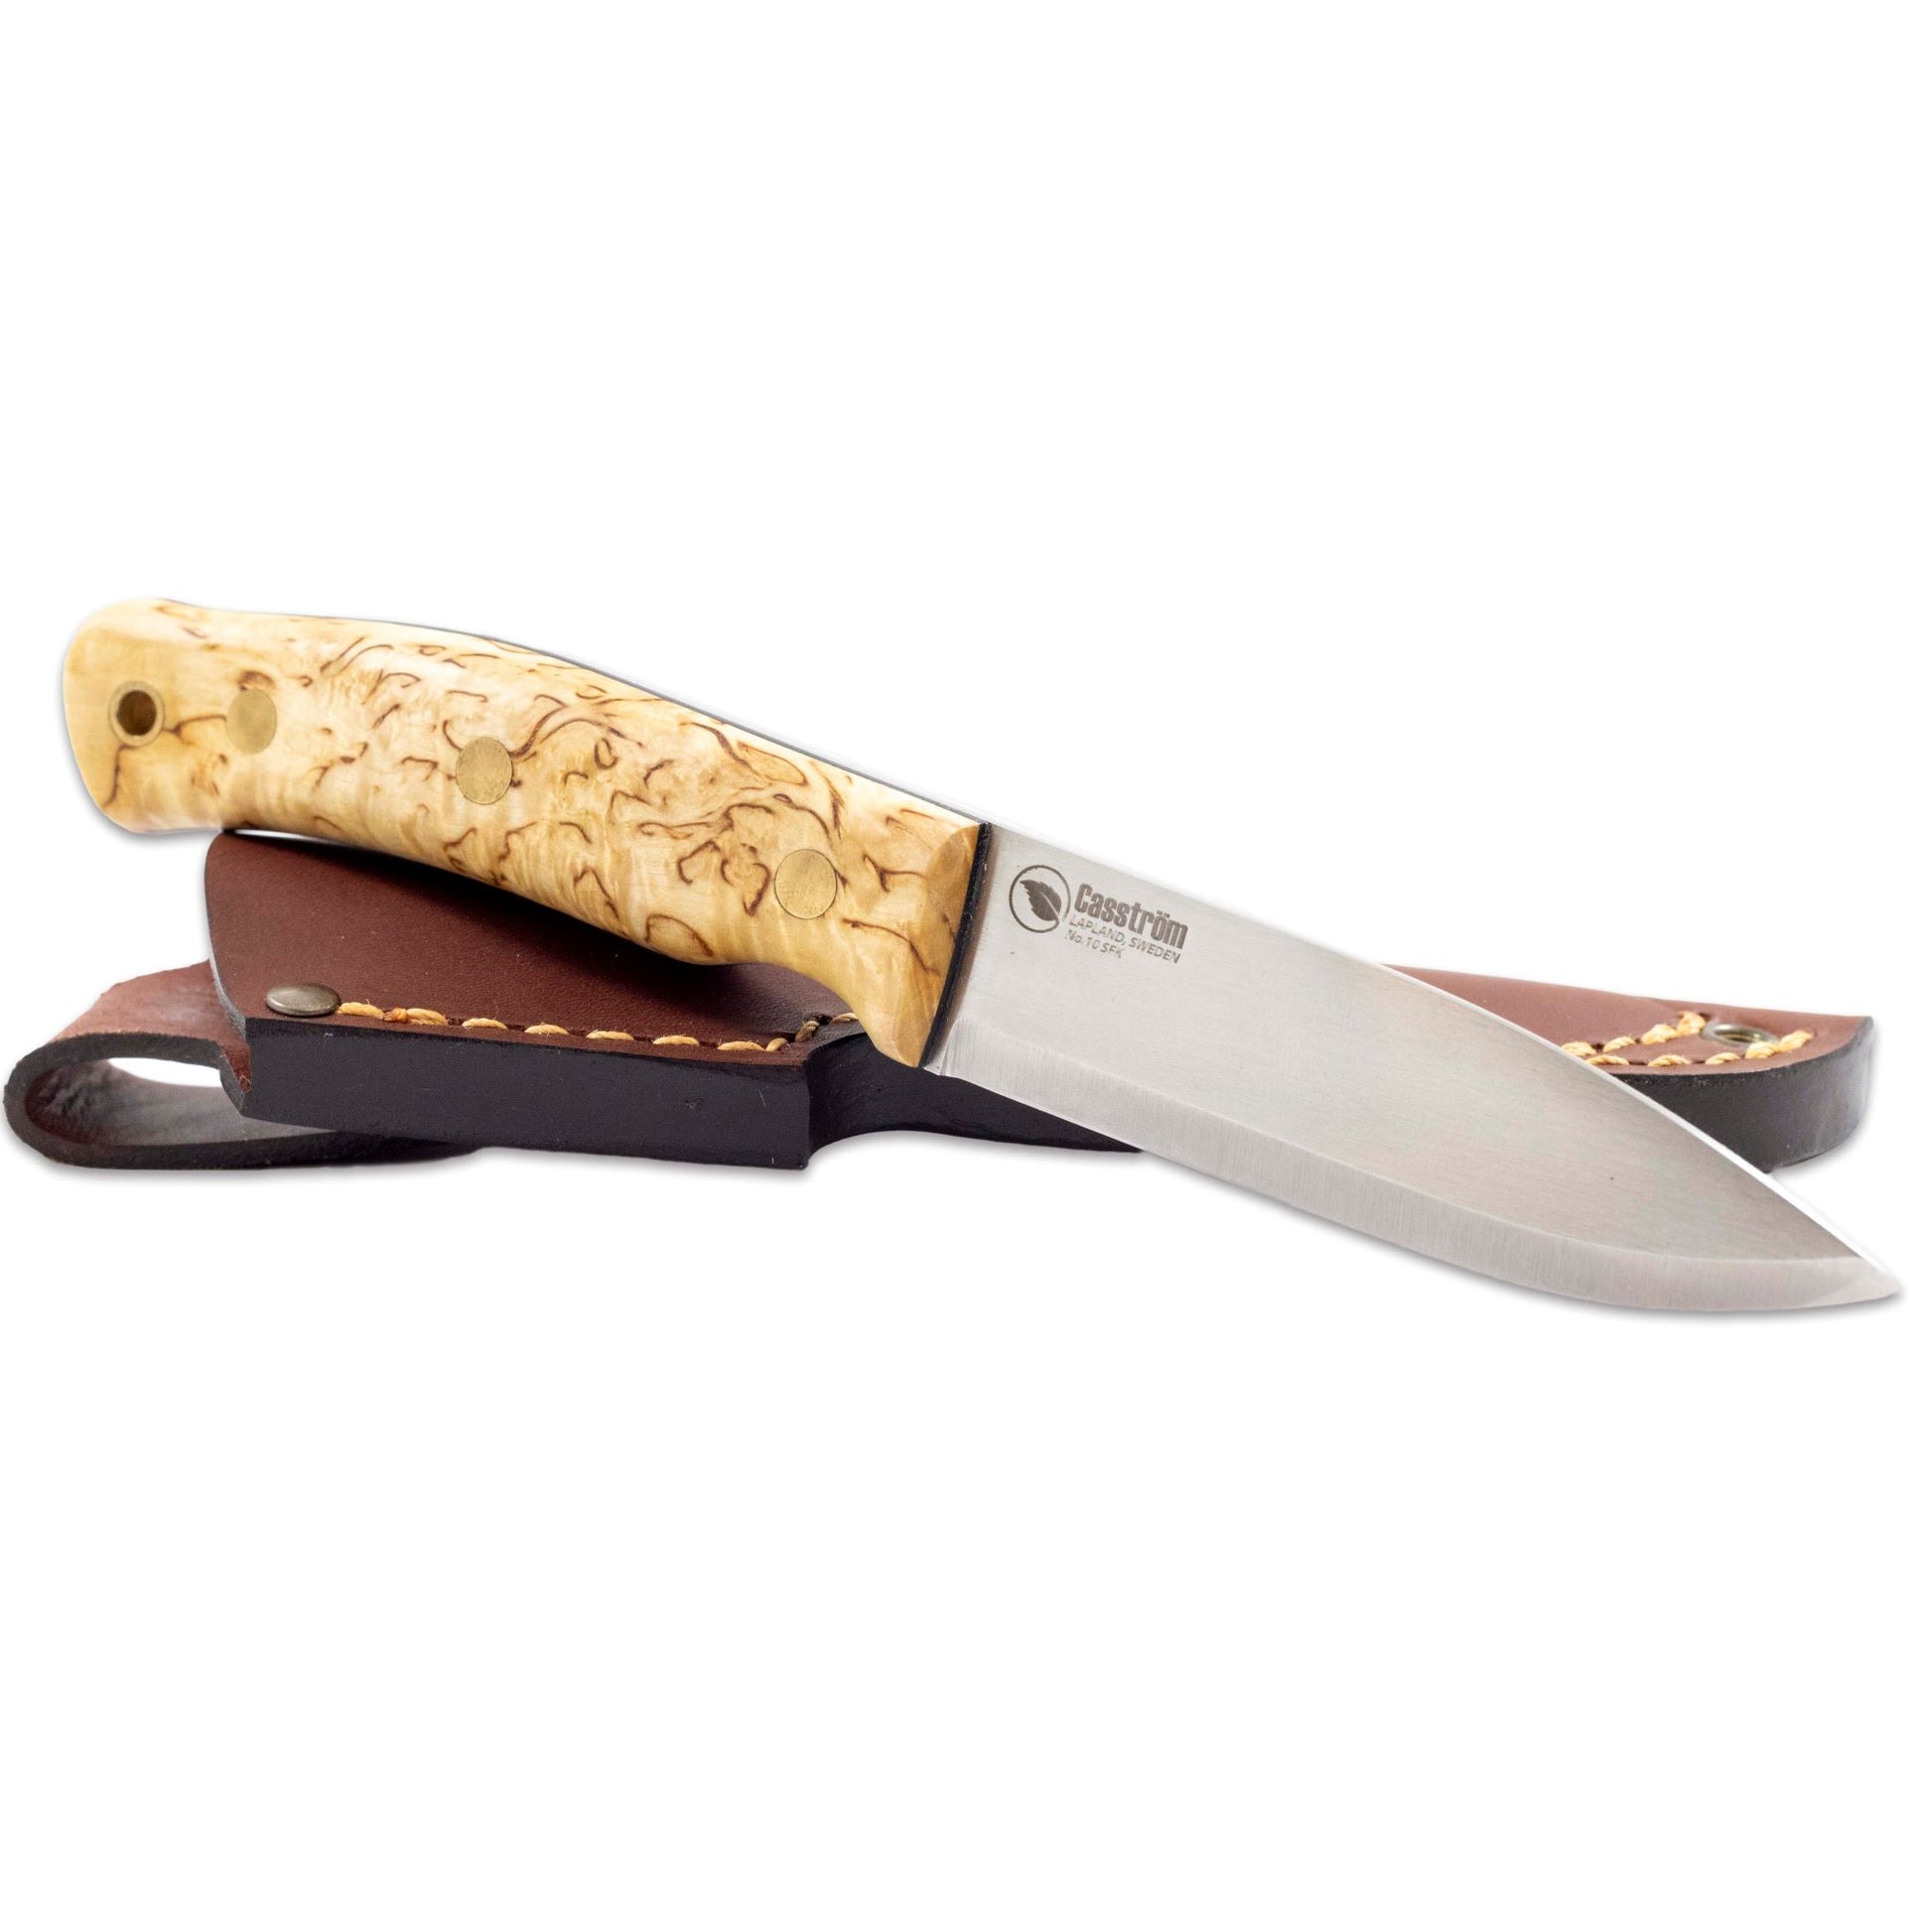 Casstrom No.10 Swedish Forest Knife. Sleipner steel blade, curly birch handle, and a cognac brown leather sheath